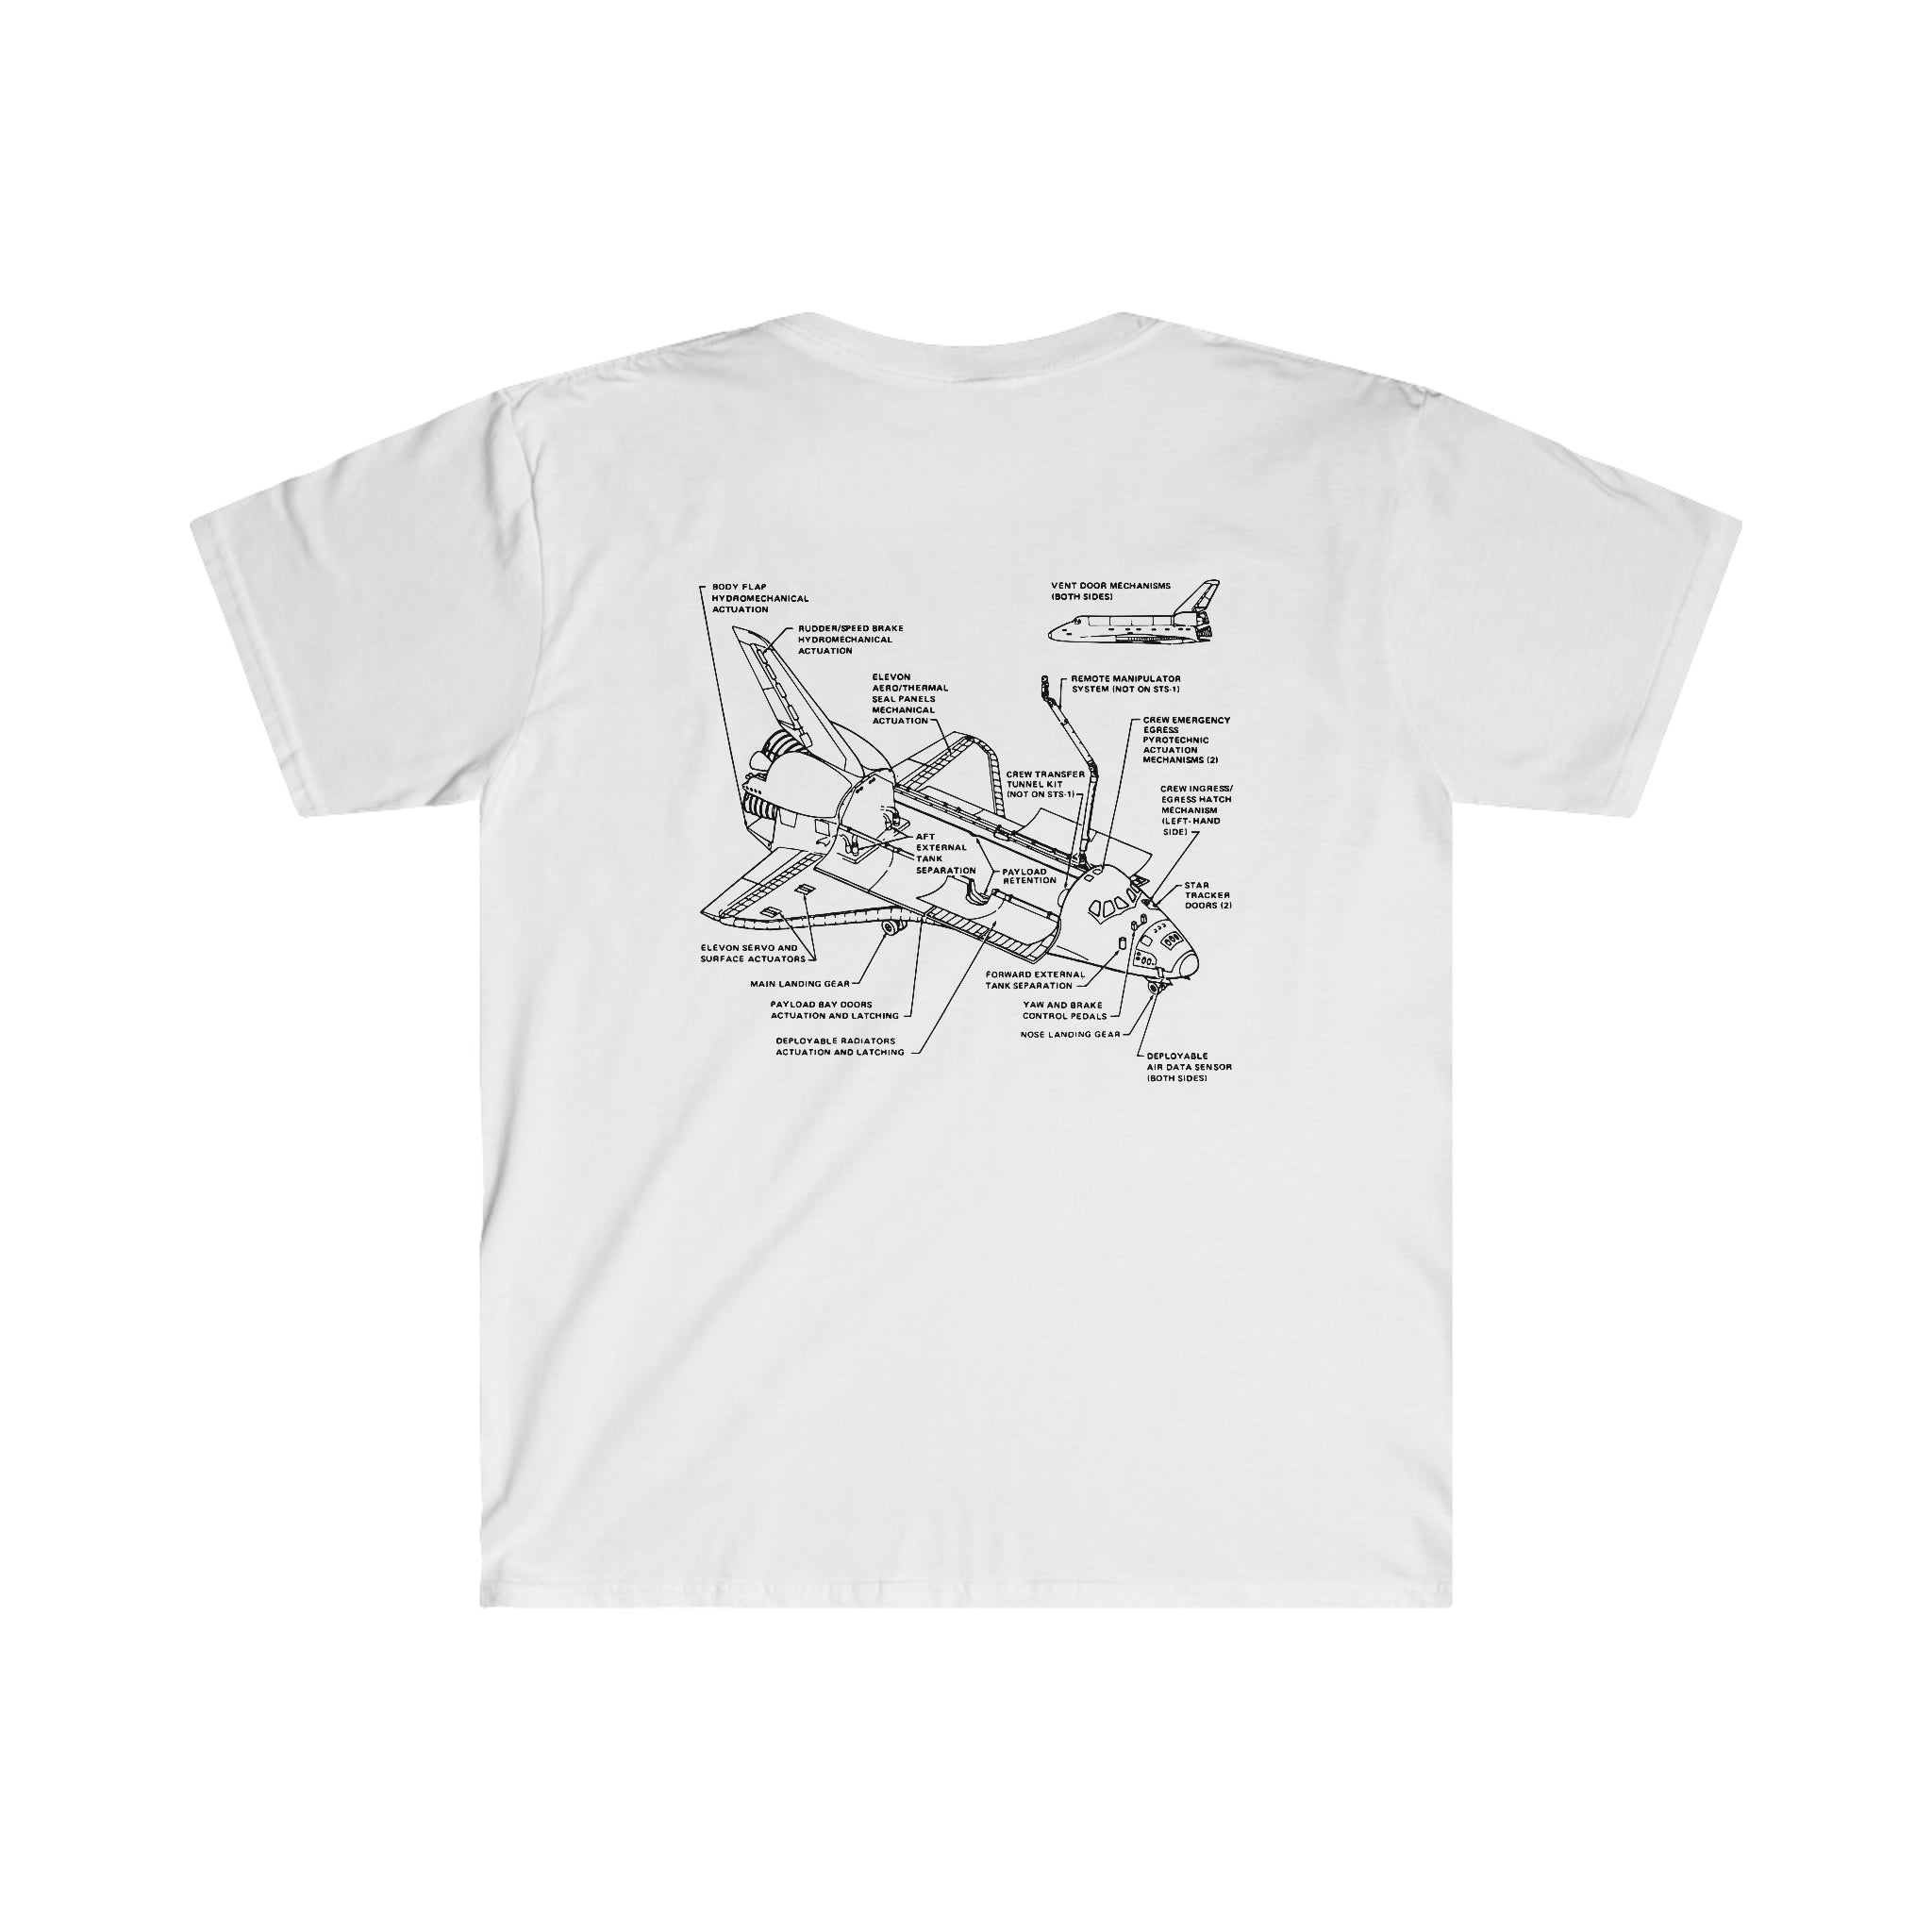 Space Shuttle in Deep Space T-Shirt